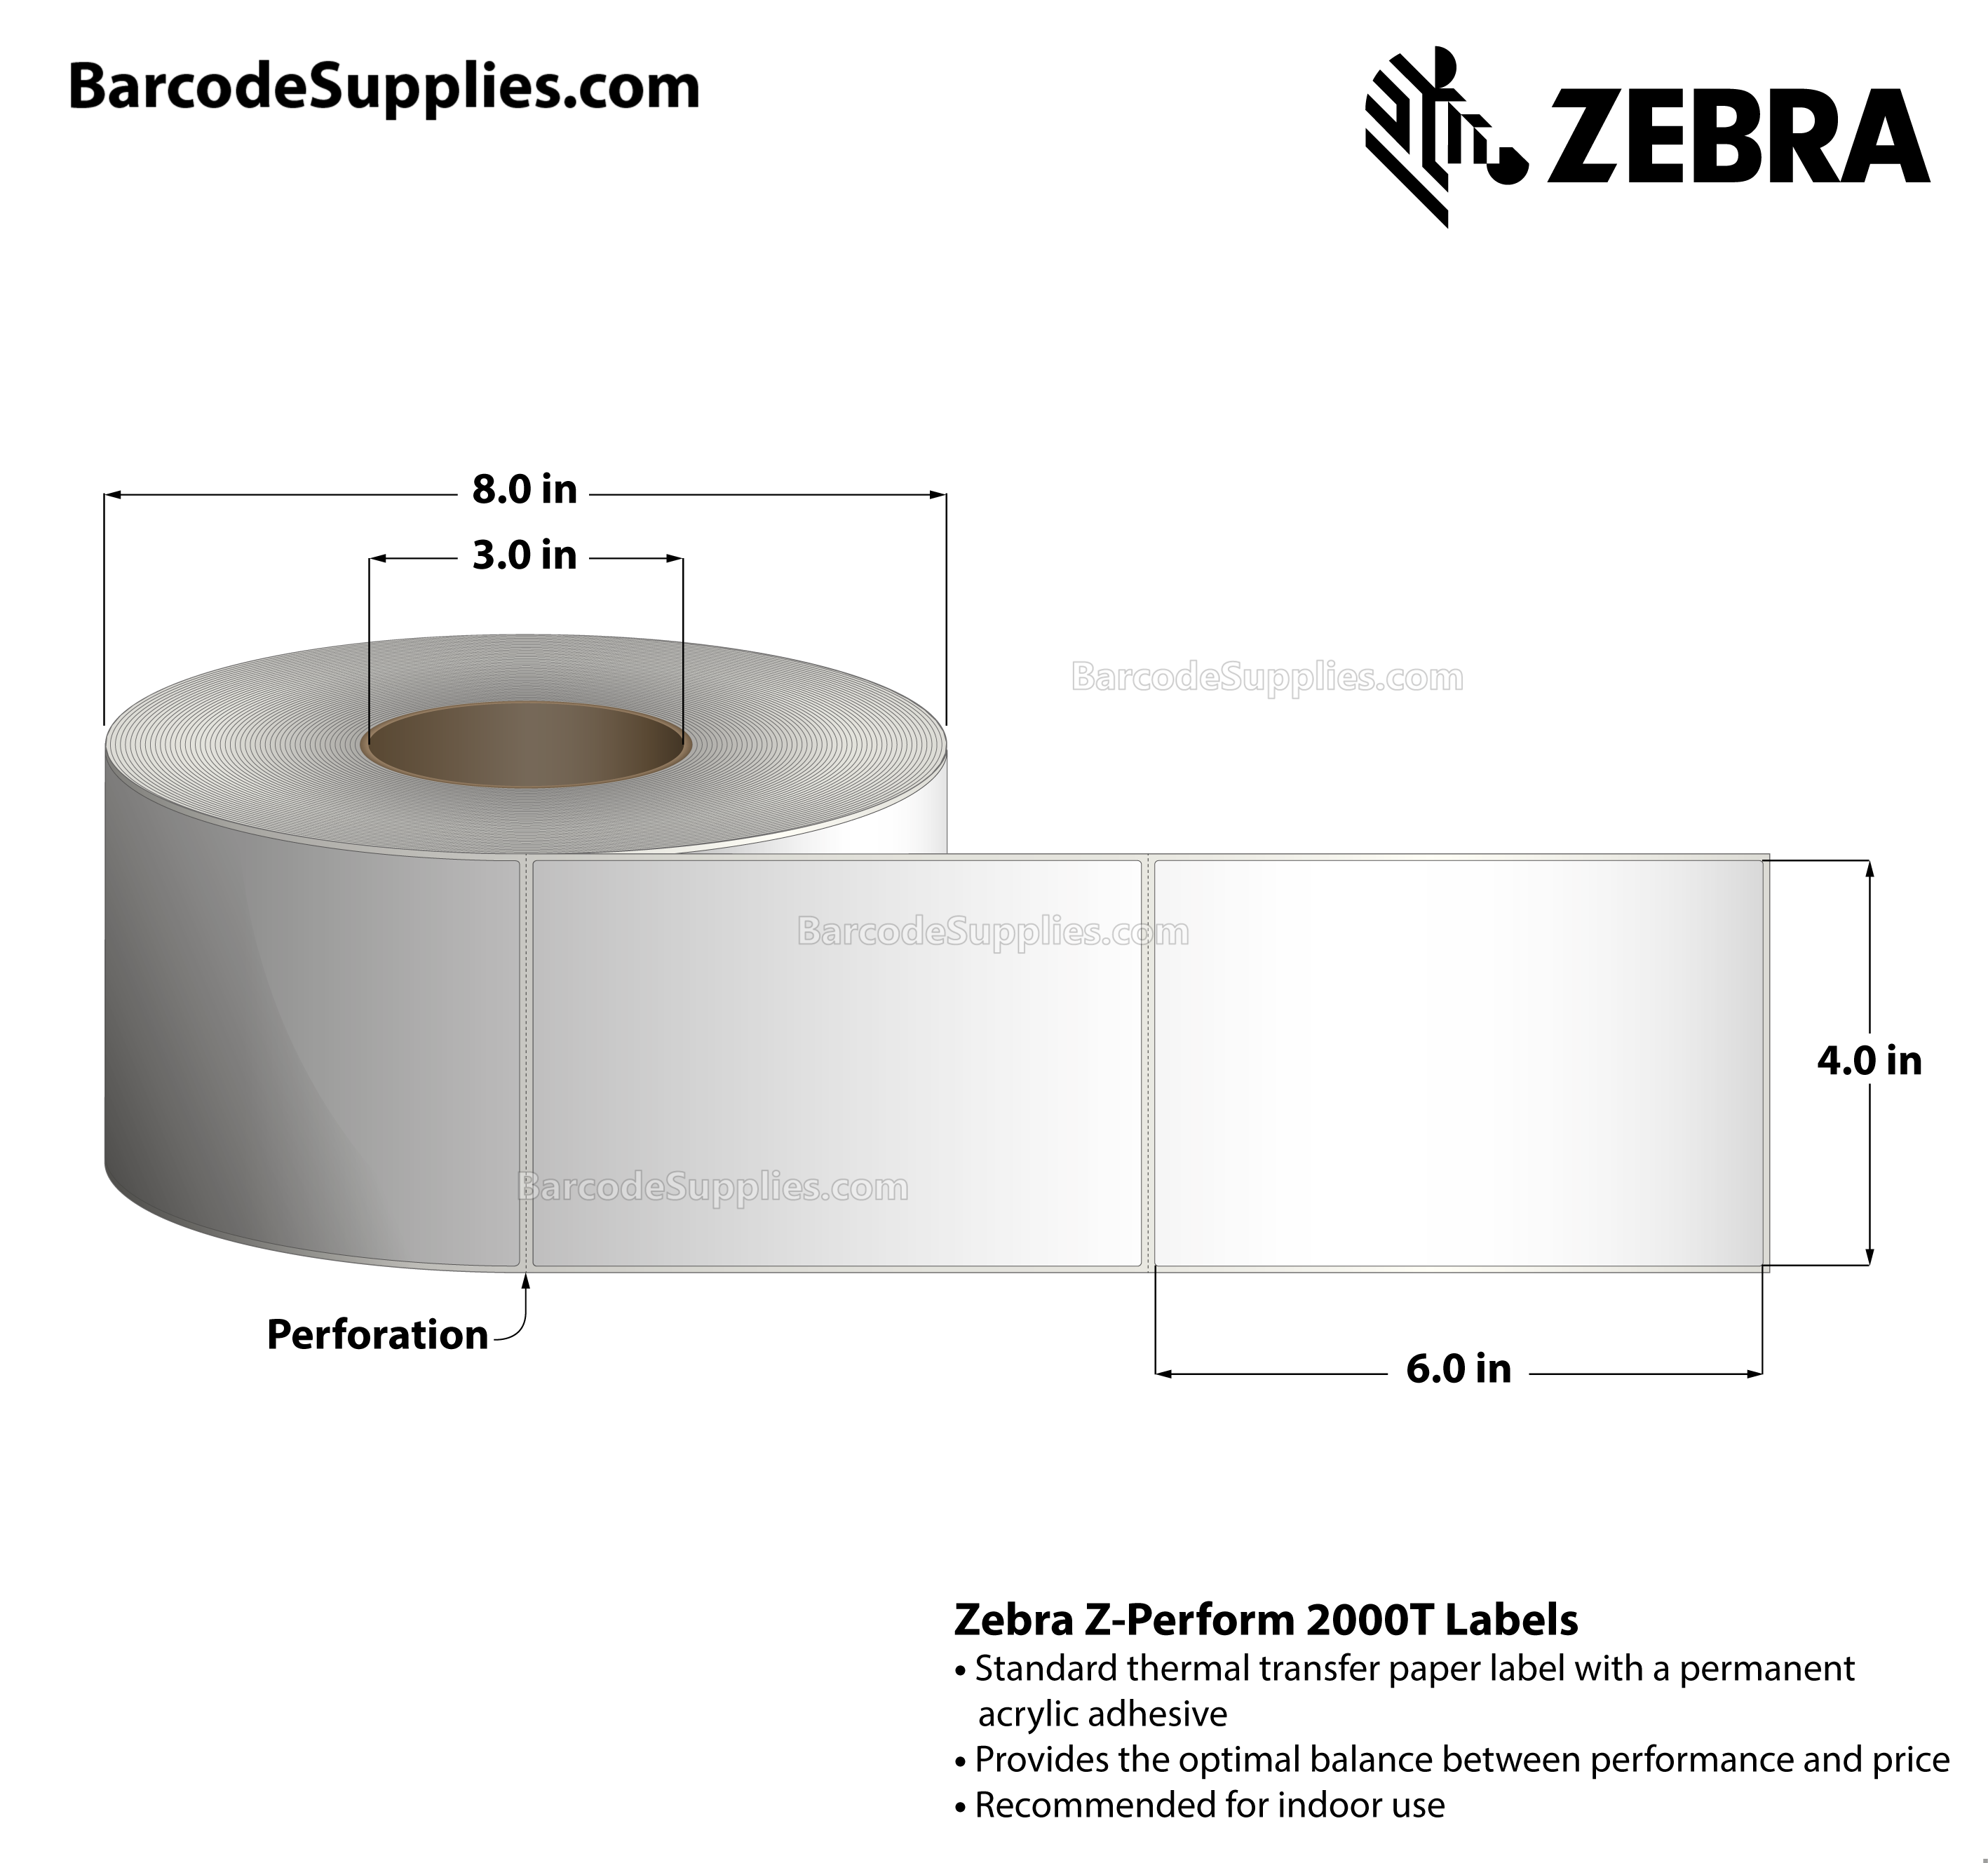 4 x 6 Thermal Transfer White Z-Perform 2000T Labels With Permanent Adhesive - Perforated - 1000 Labels Per Roll - Carton Of 4 Rolls - 4000 Labels Total - MPN: 10000281